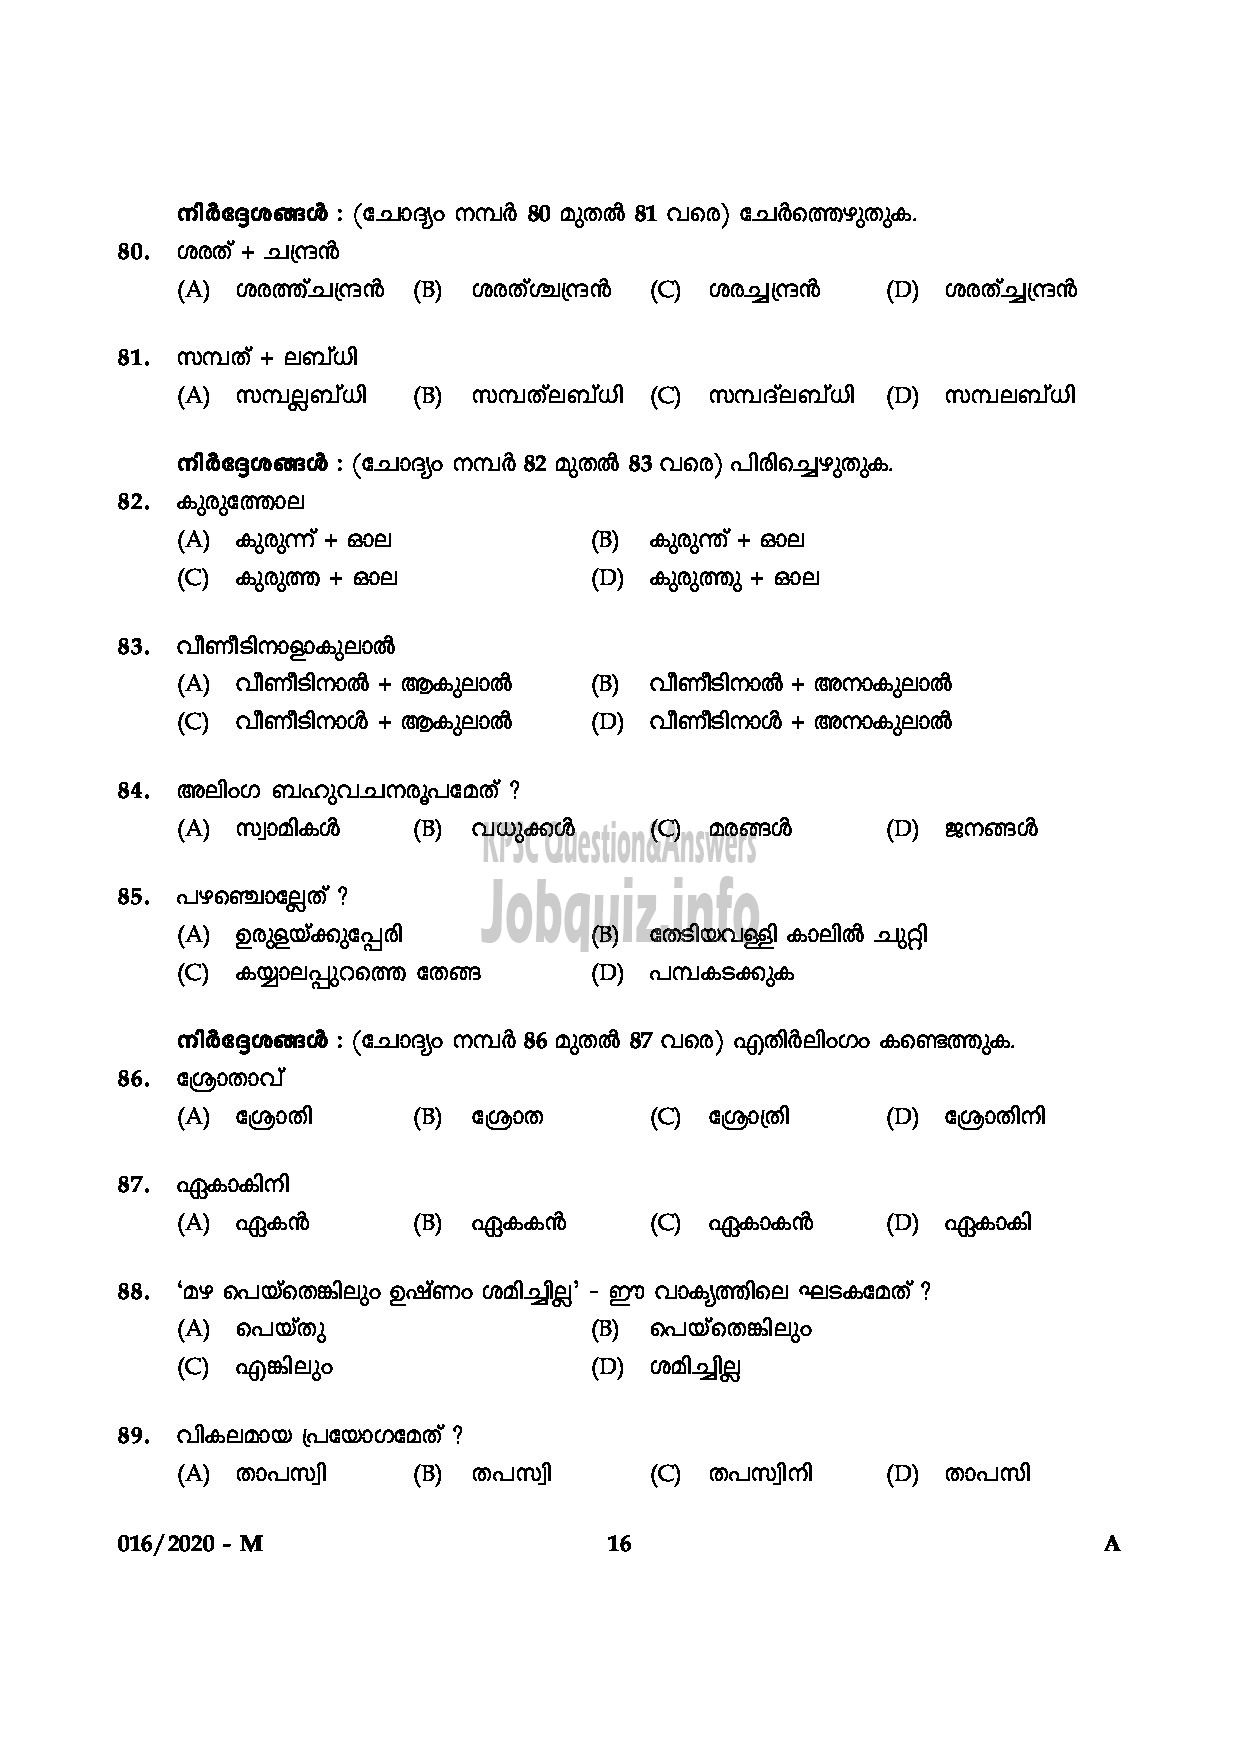 Kerala PSC Question Paper - KAS OFFICER (JUNIOR TIME SCALE) TRAINEE KERALA ADMINISTRATIVE SERVICE-16